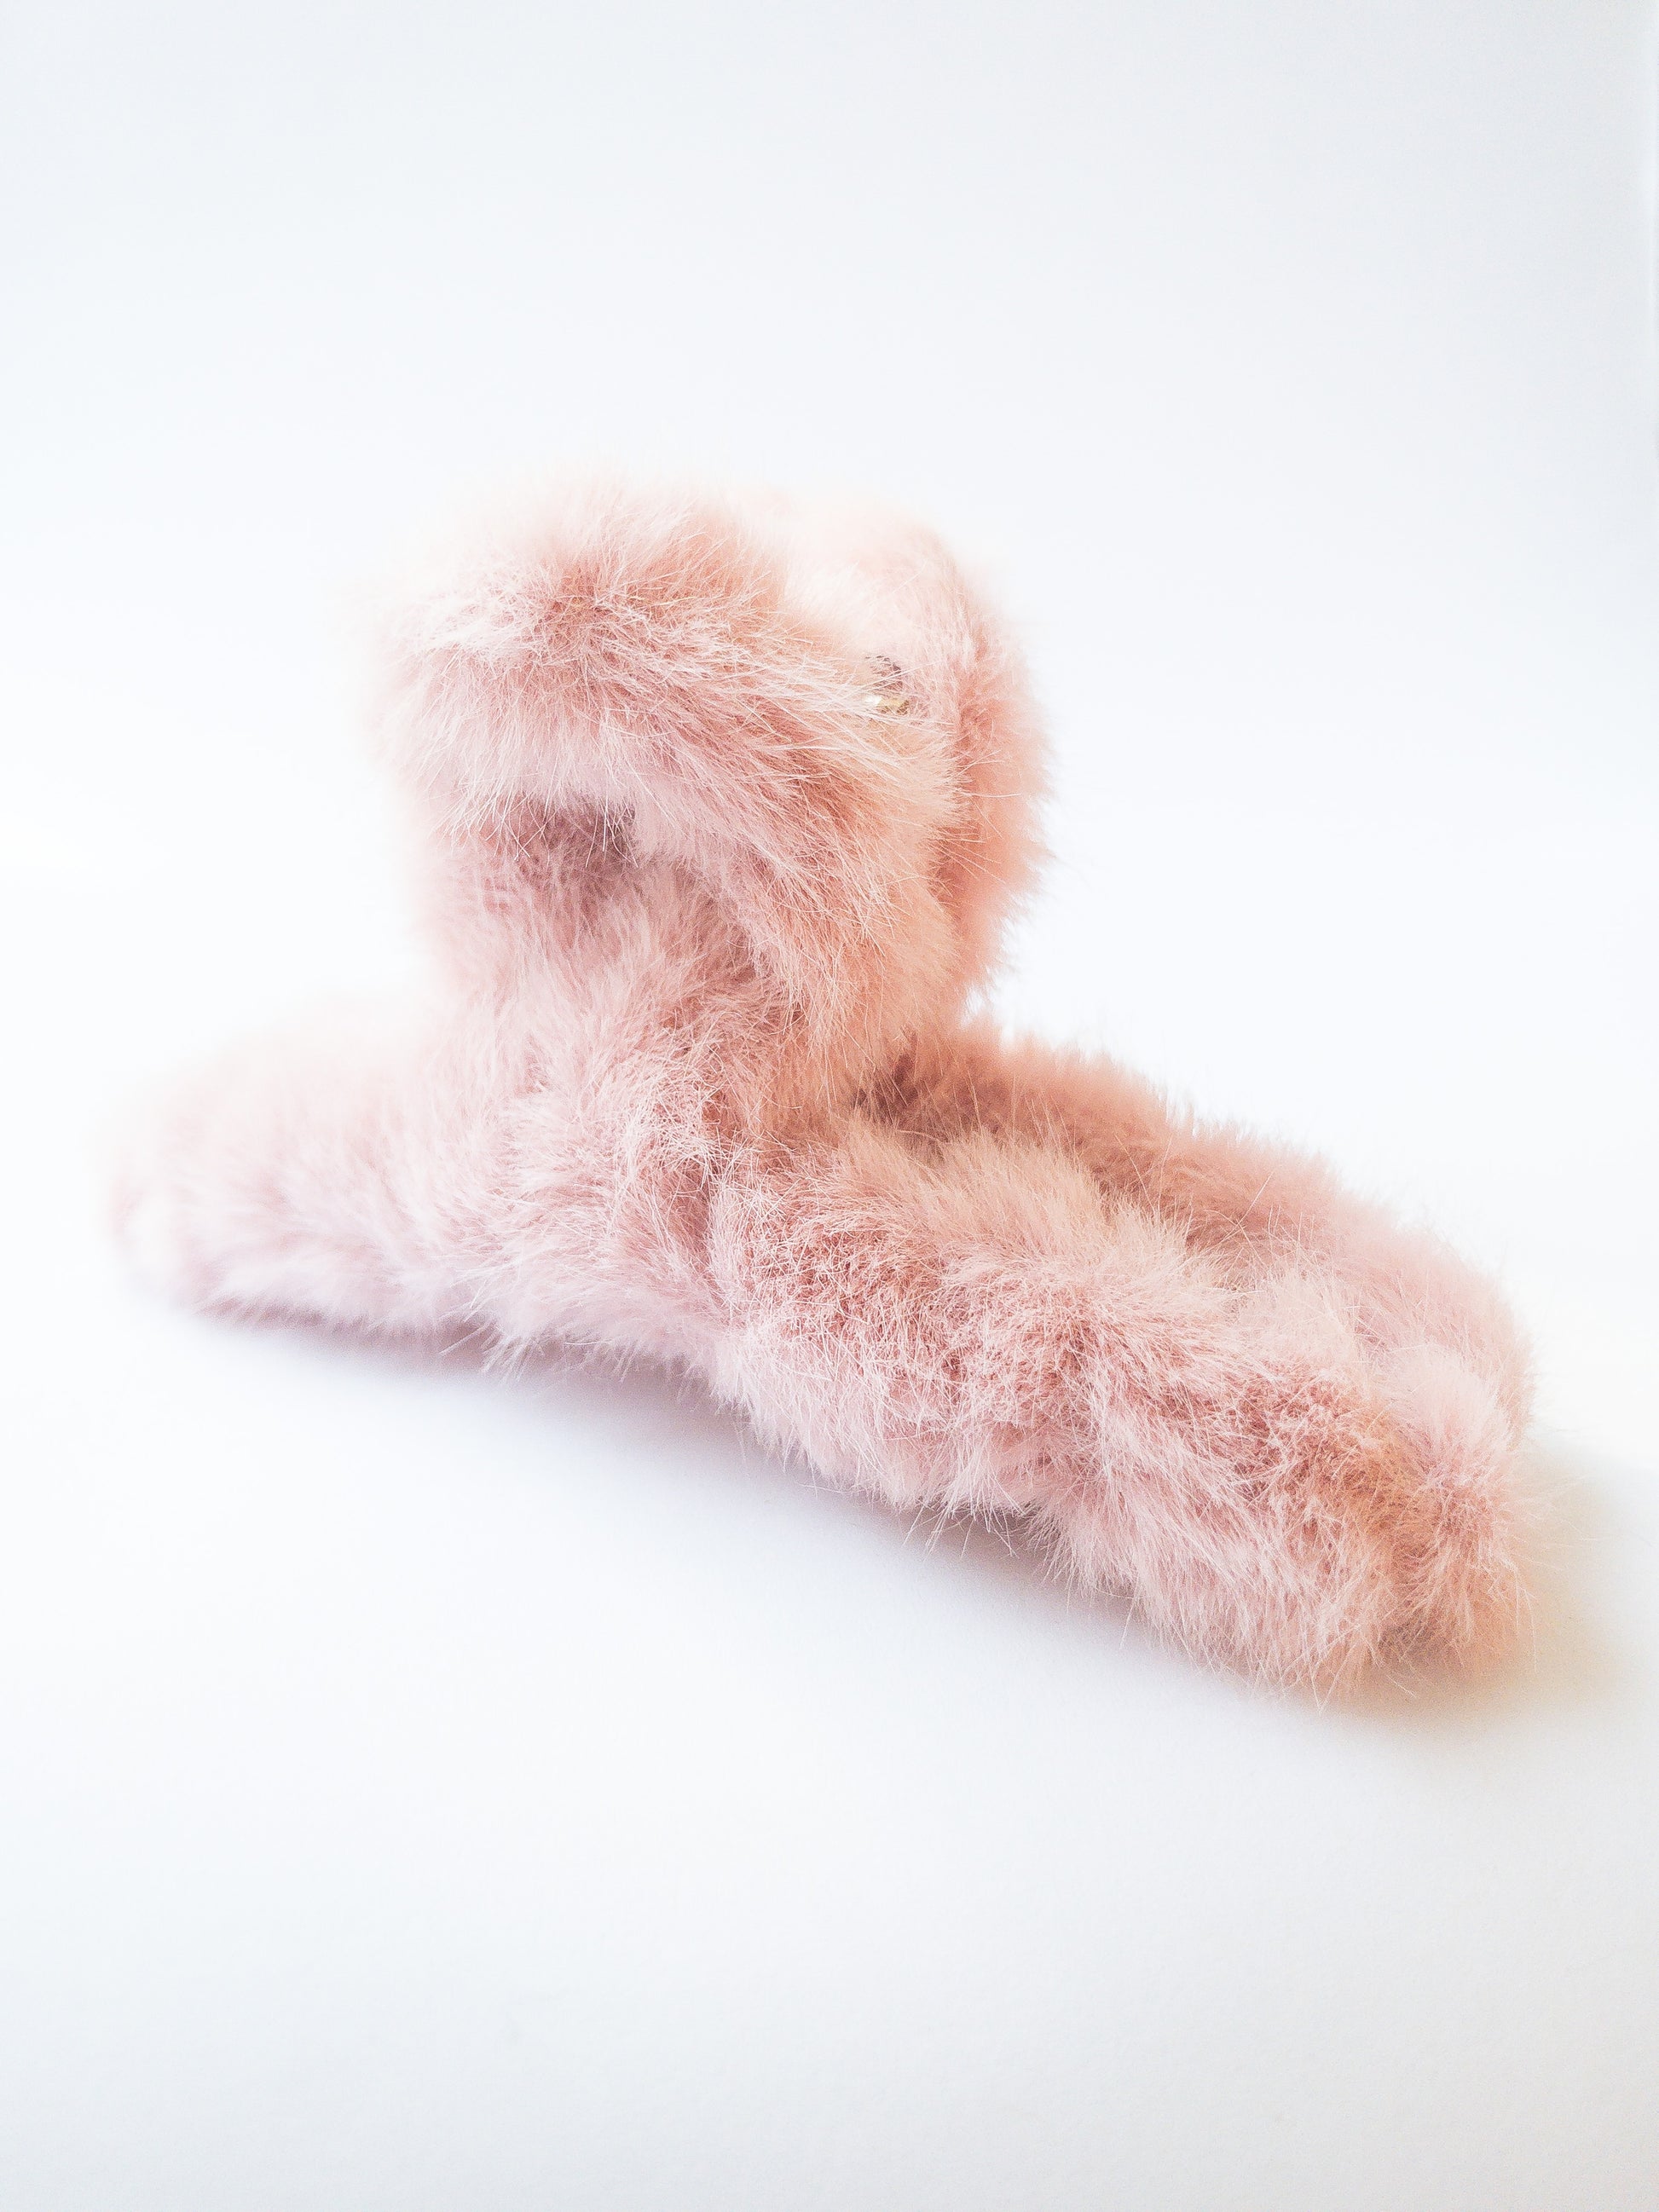 Just pure softness in a hair claw. Each transparent loop hair claw is wrapped in a furry soft pink fabric for those easy to grab, messy hair days.